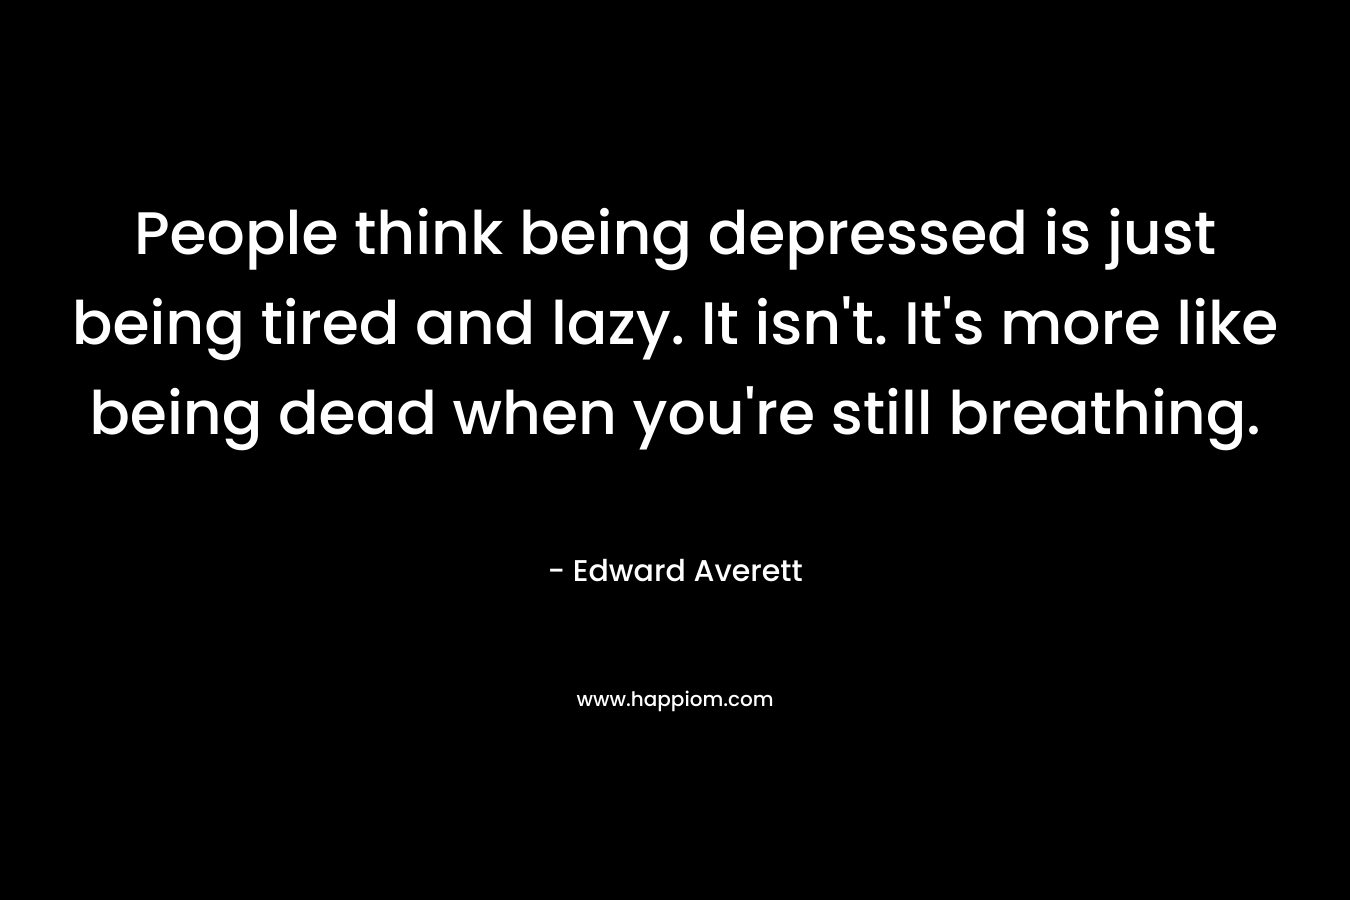 People think being depressed is just being tired and lazy. It isn't. It's more like being dead when you're still breathing.